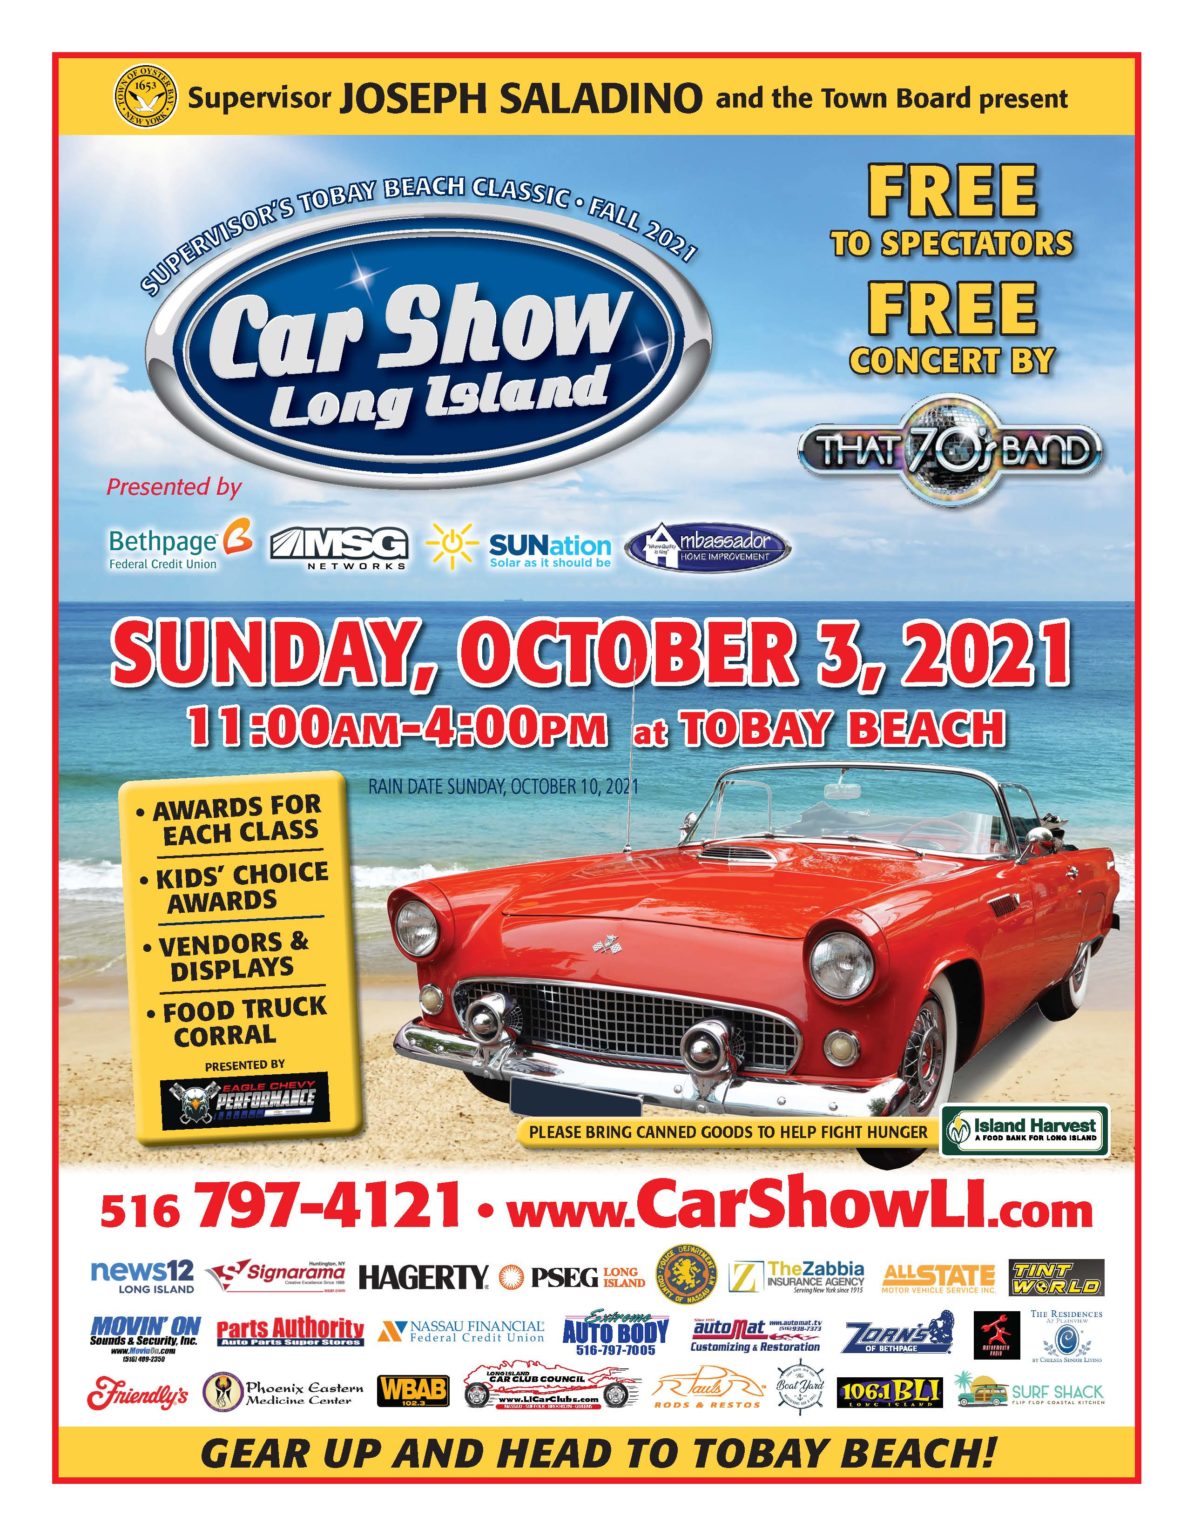 Long Island’s Largest Car Show Takes Place Sunday, October 3rd at TOBAY